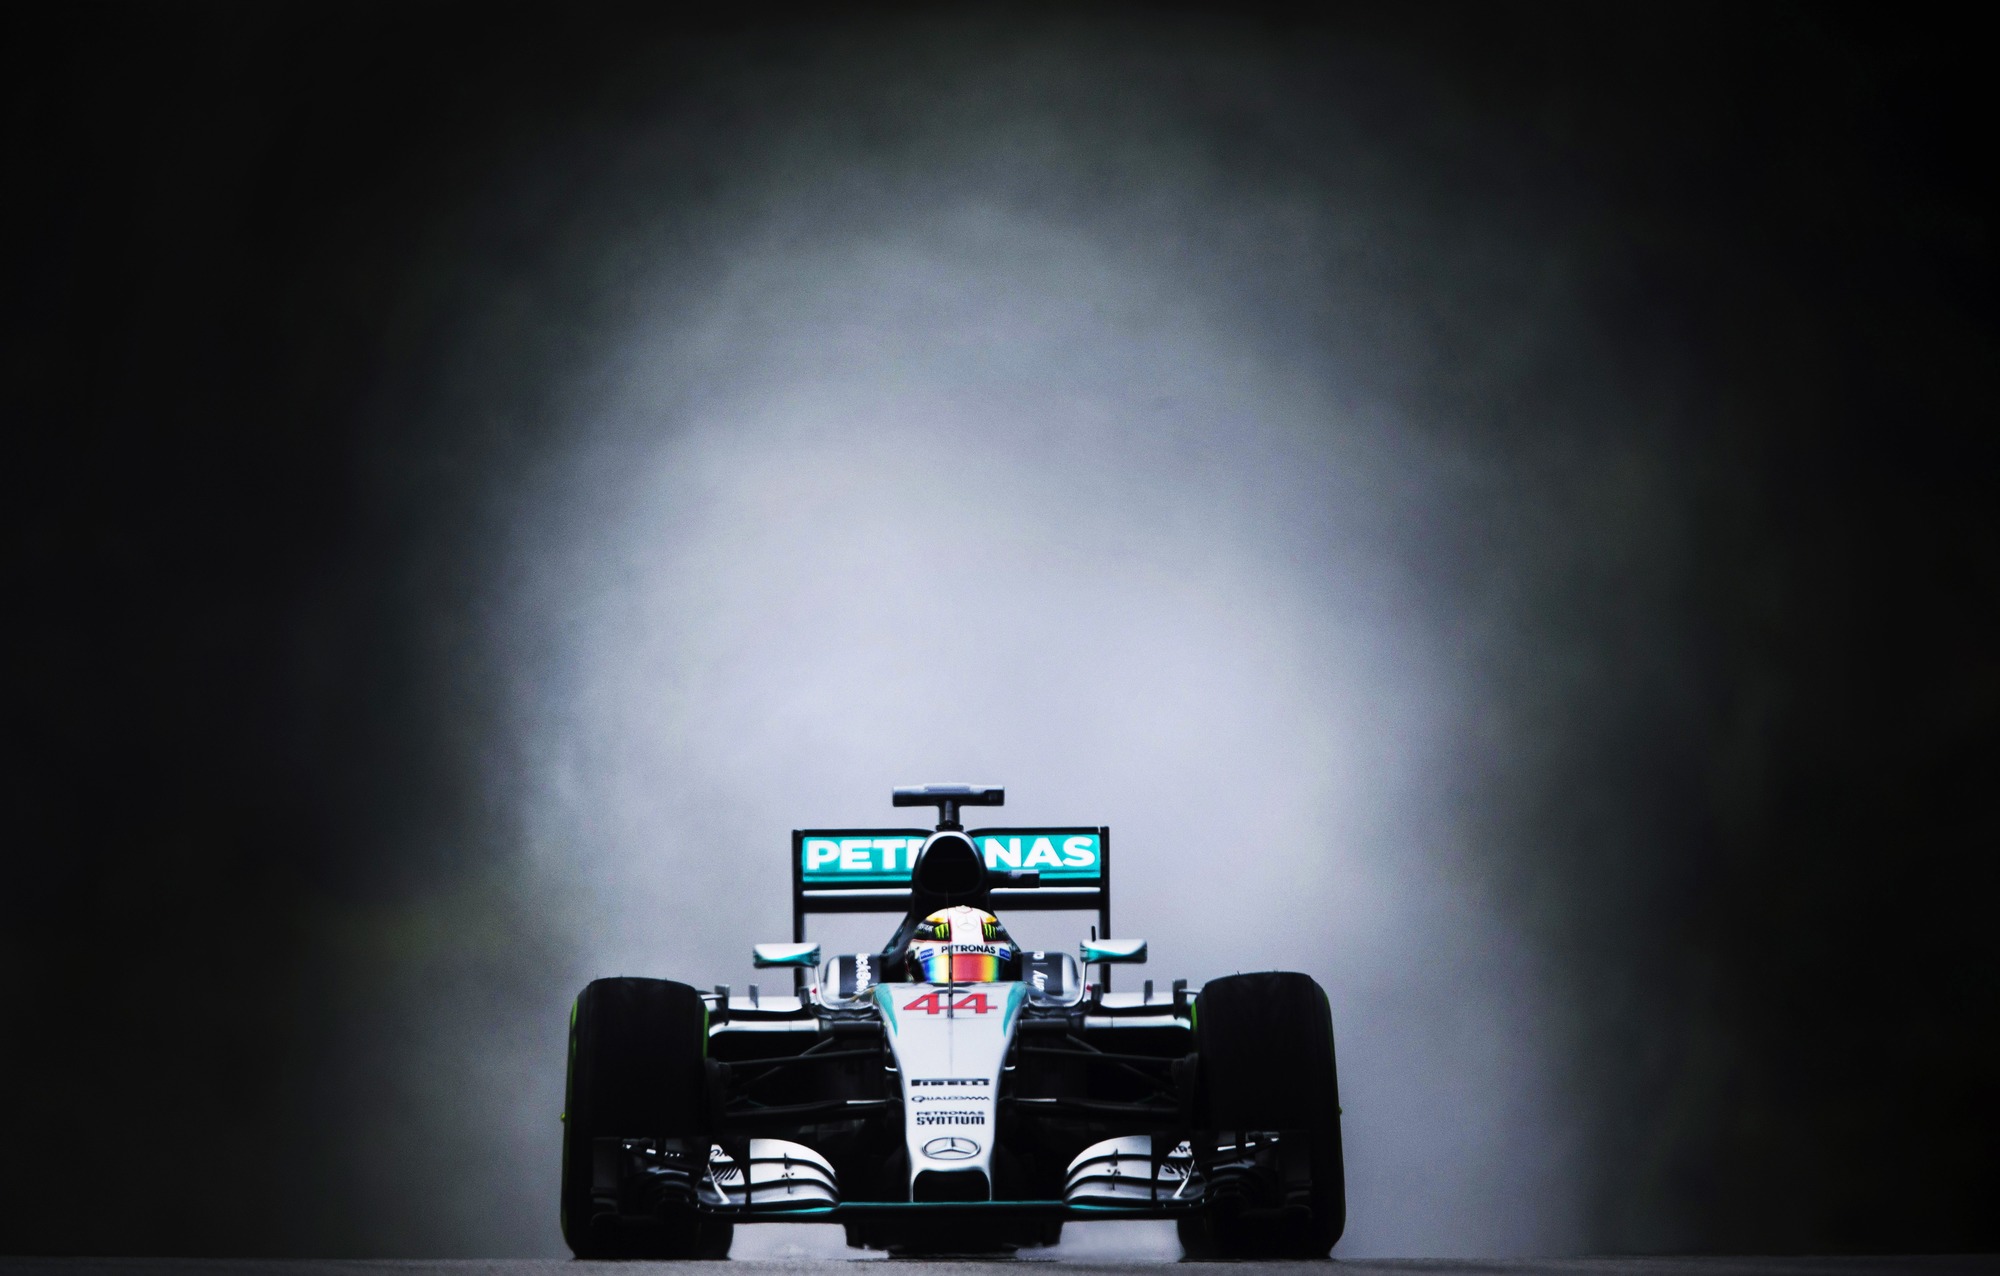 Lewis Wallpaper Pictures To Pin